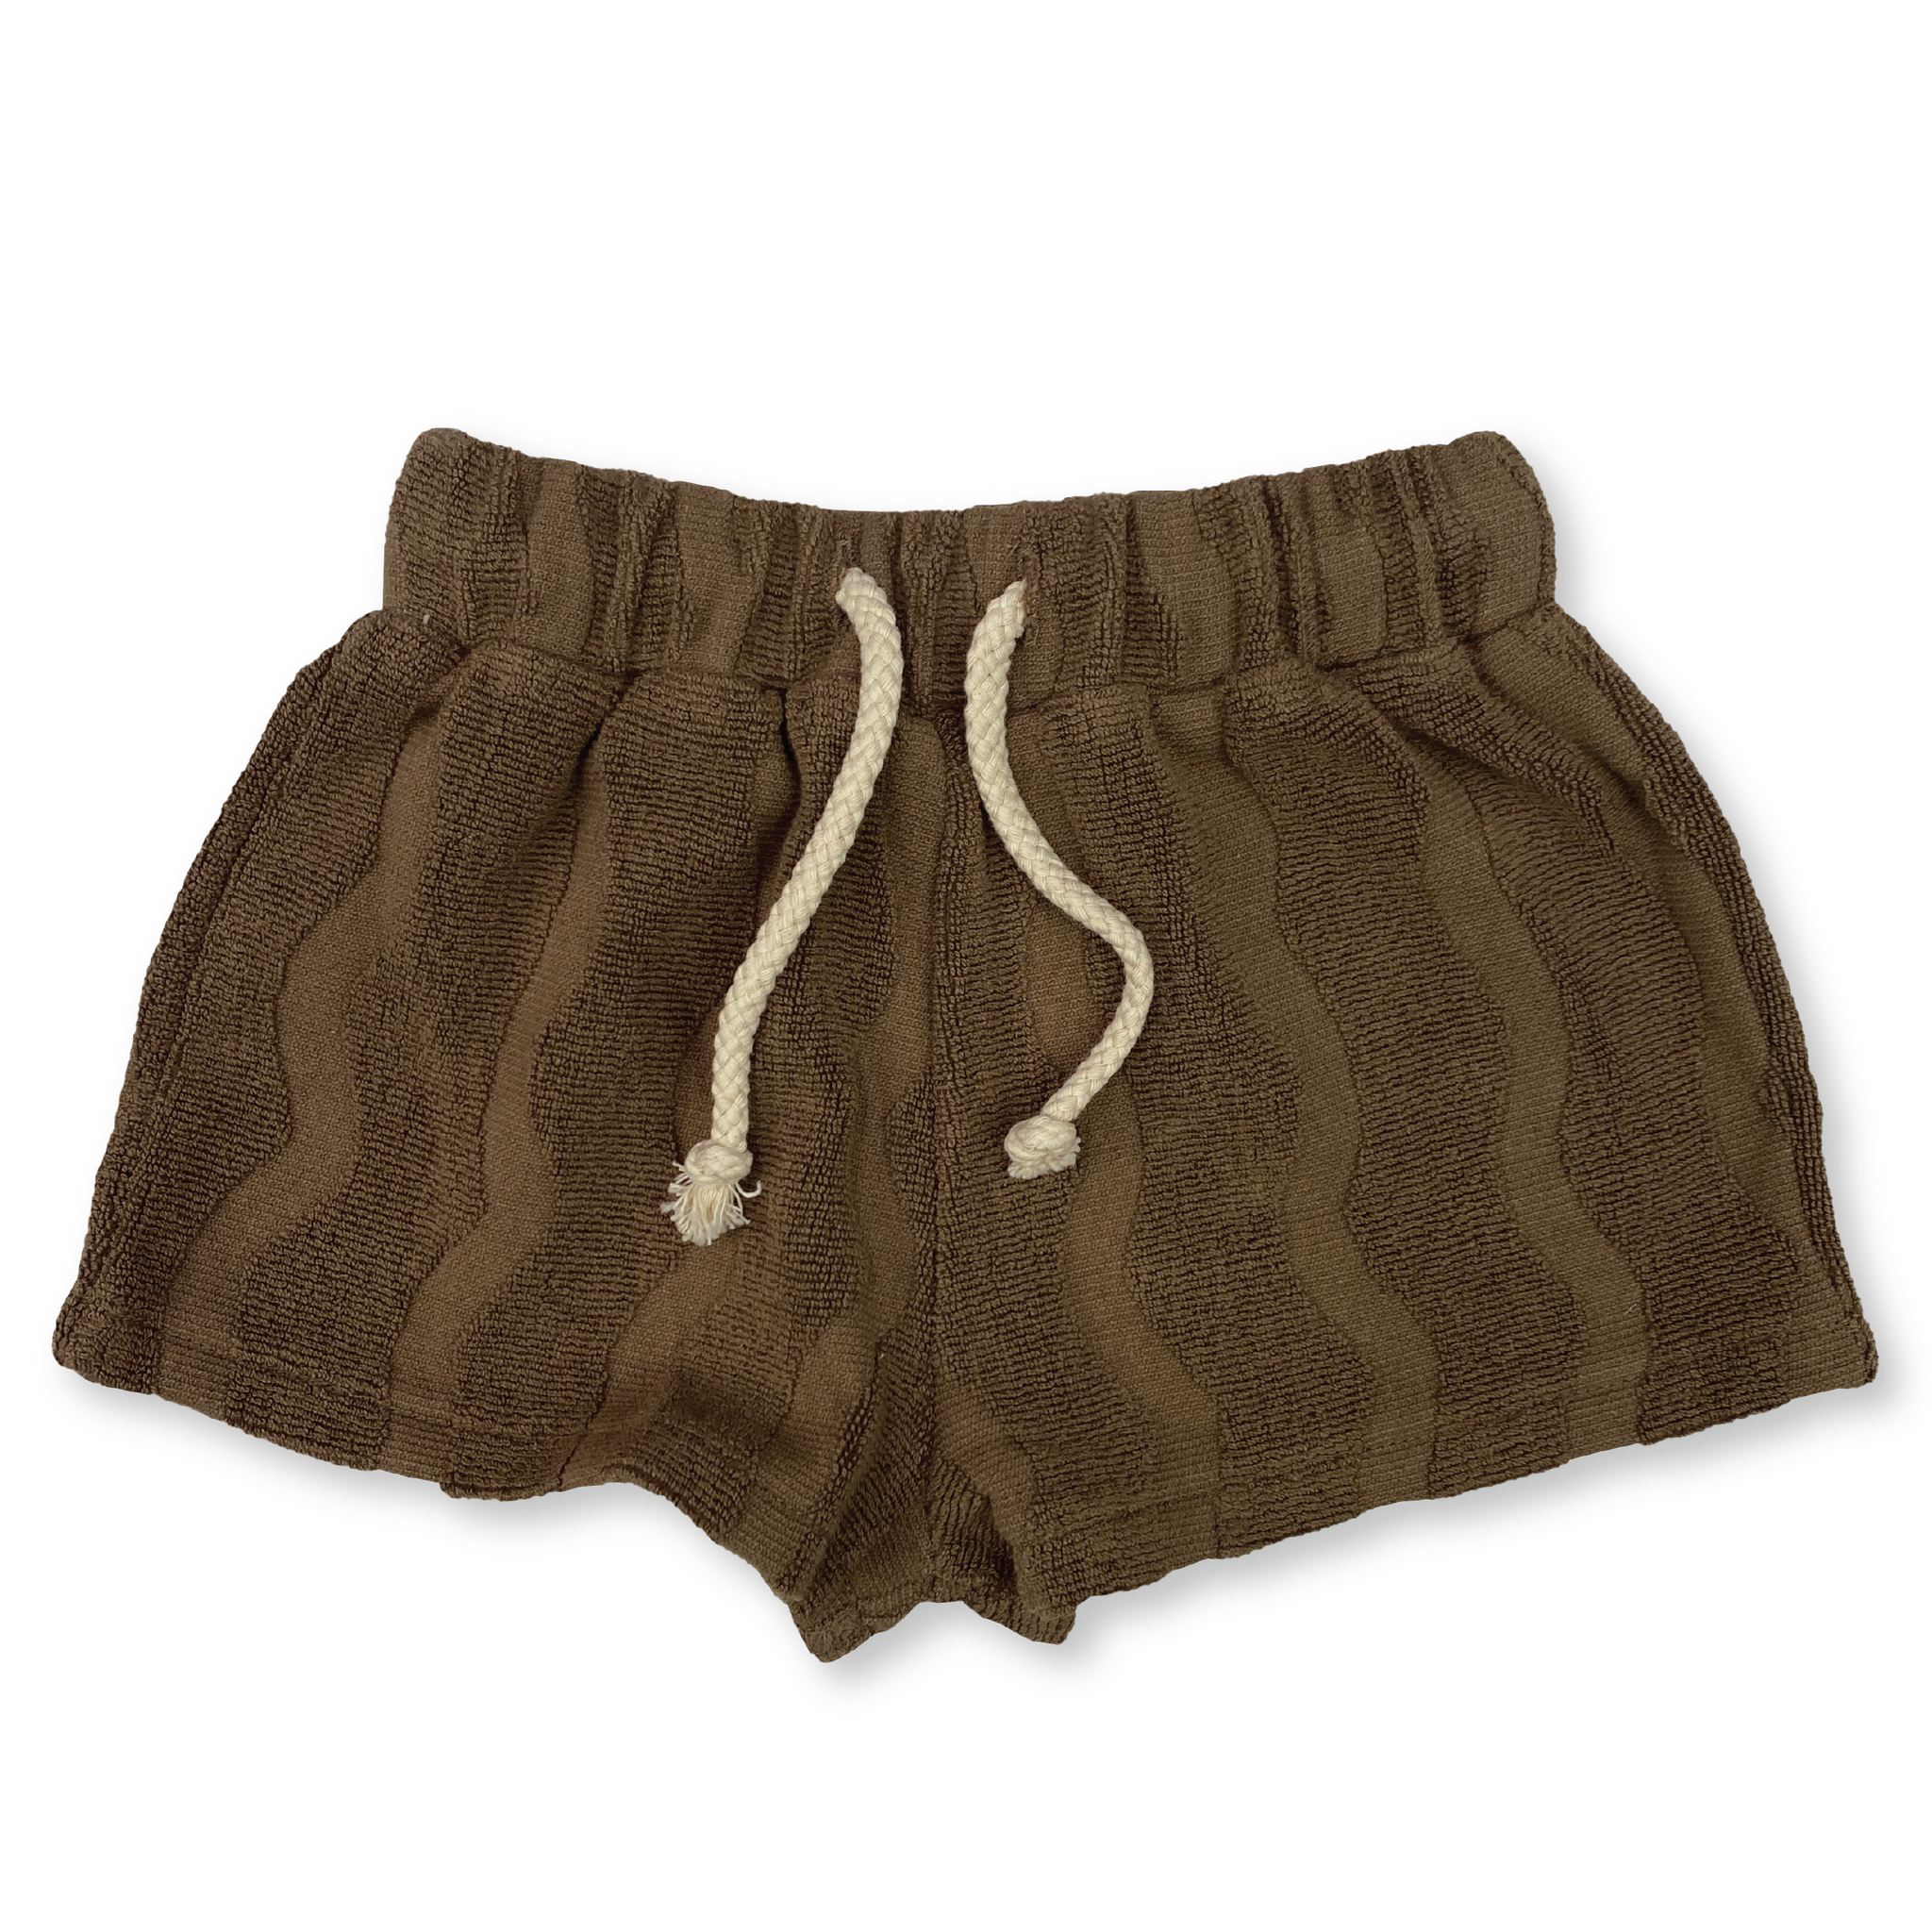 Grown Terry Shorts - Mud Wave